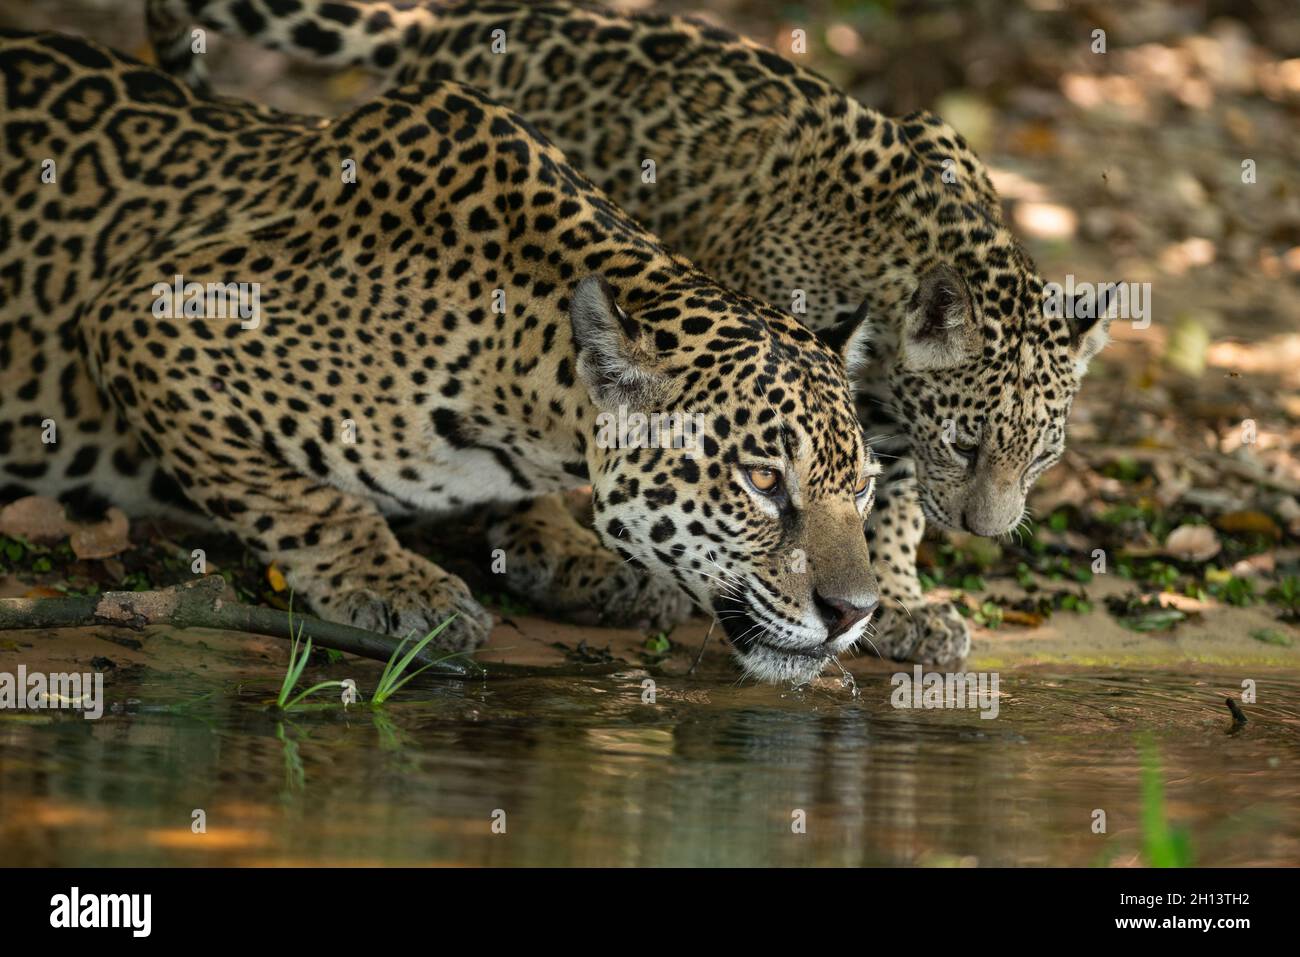 A Jaguar with a cub drinking water in North Pantanal, Brazil Stock Photo